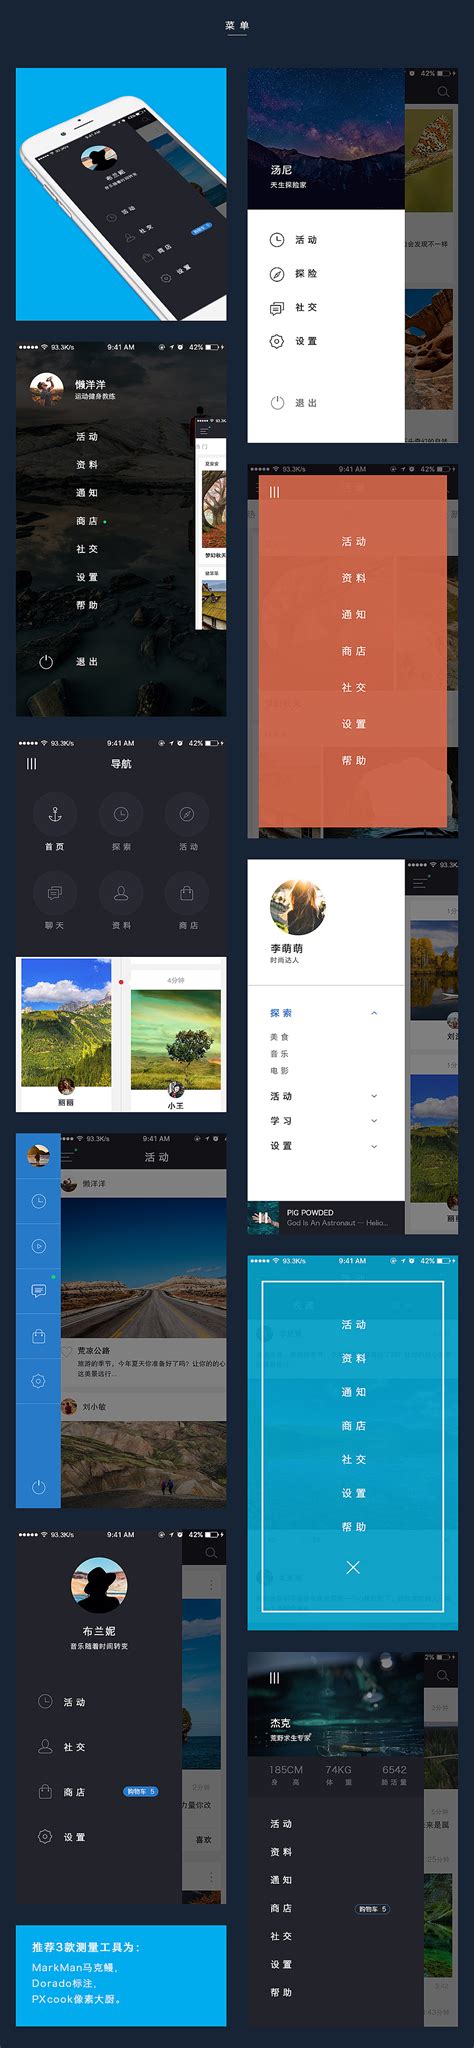 iOS 14 app for Design+Code by Meng To on Dribbble